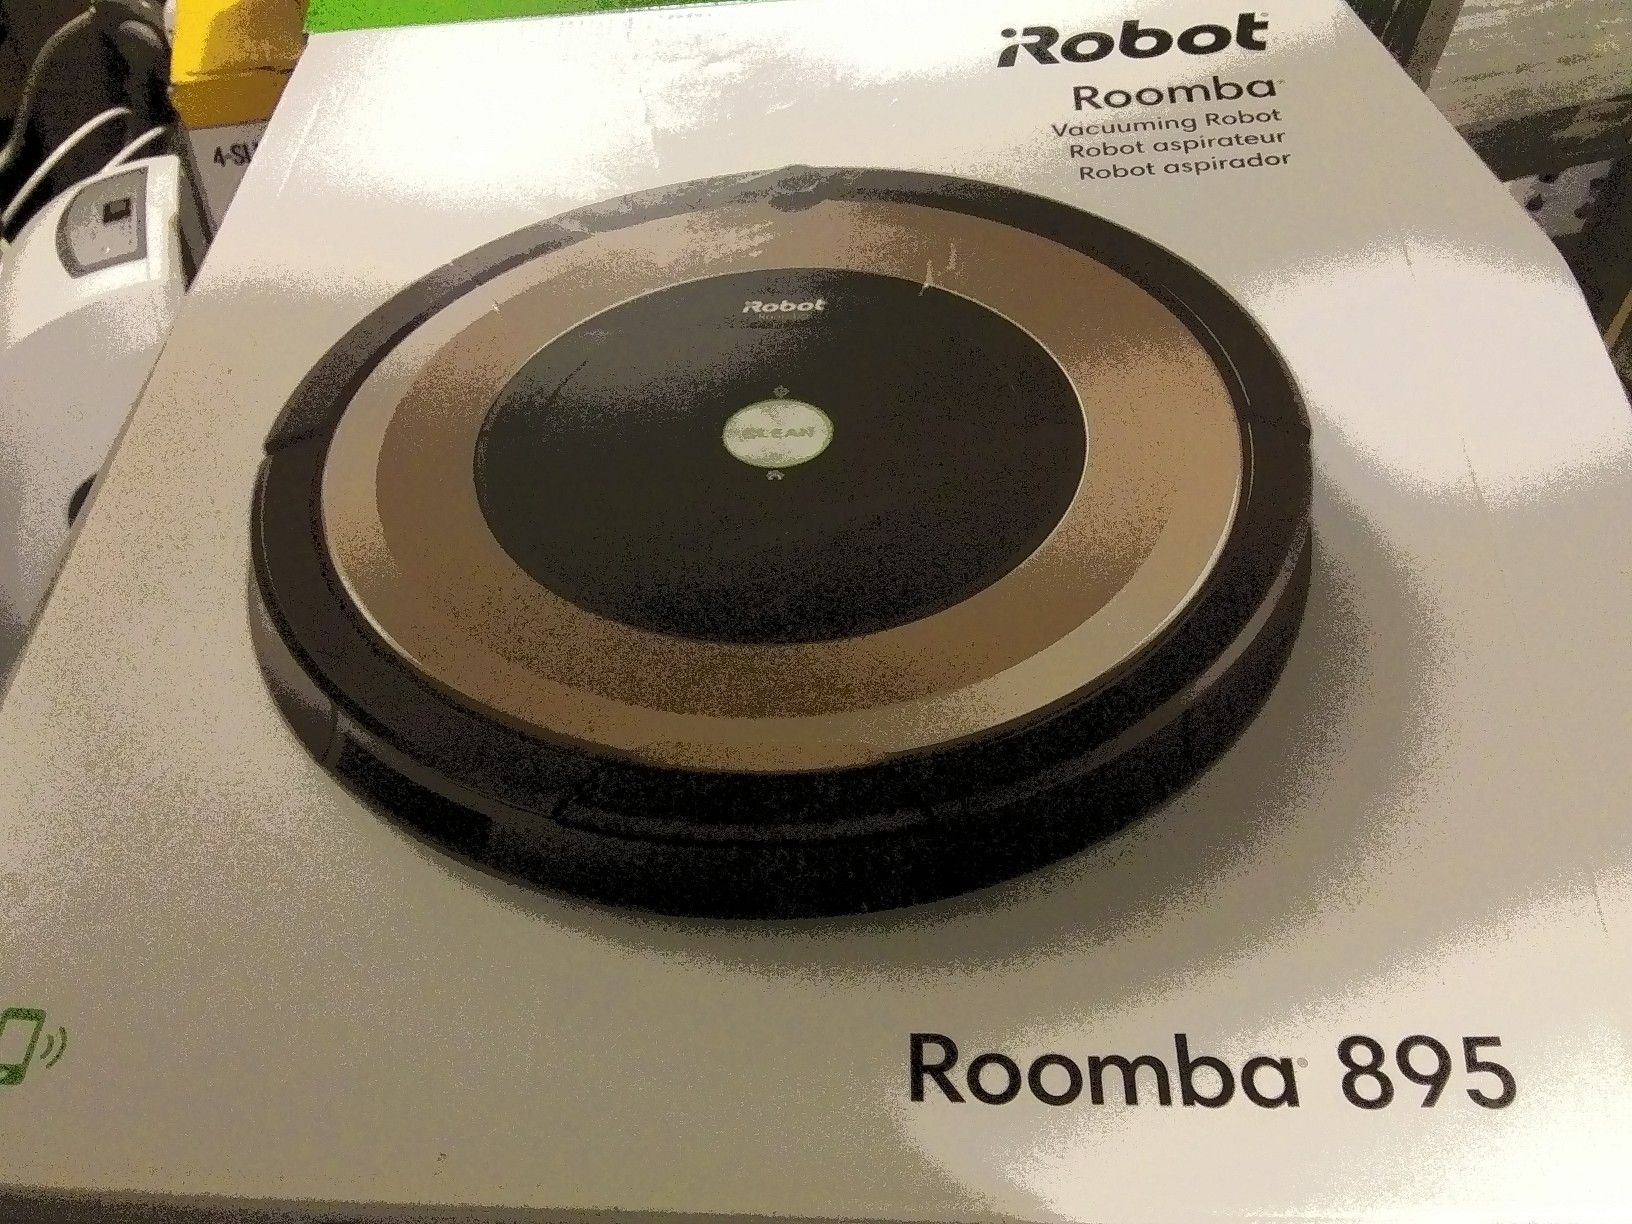 This is the 895 Roomba I robotic vacuum cleaner